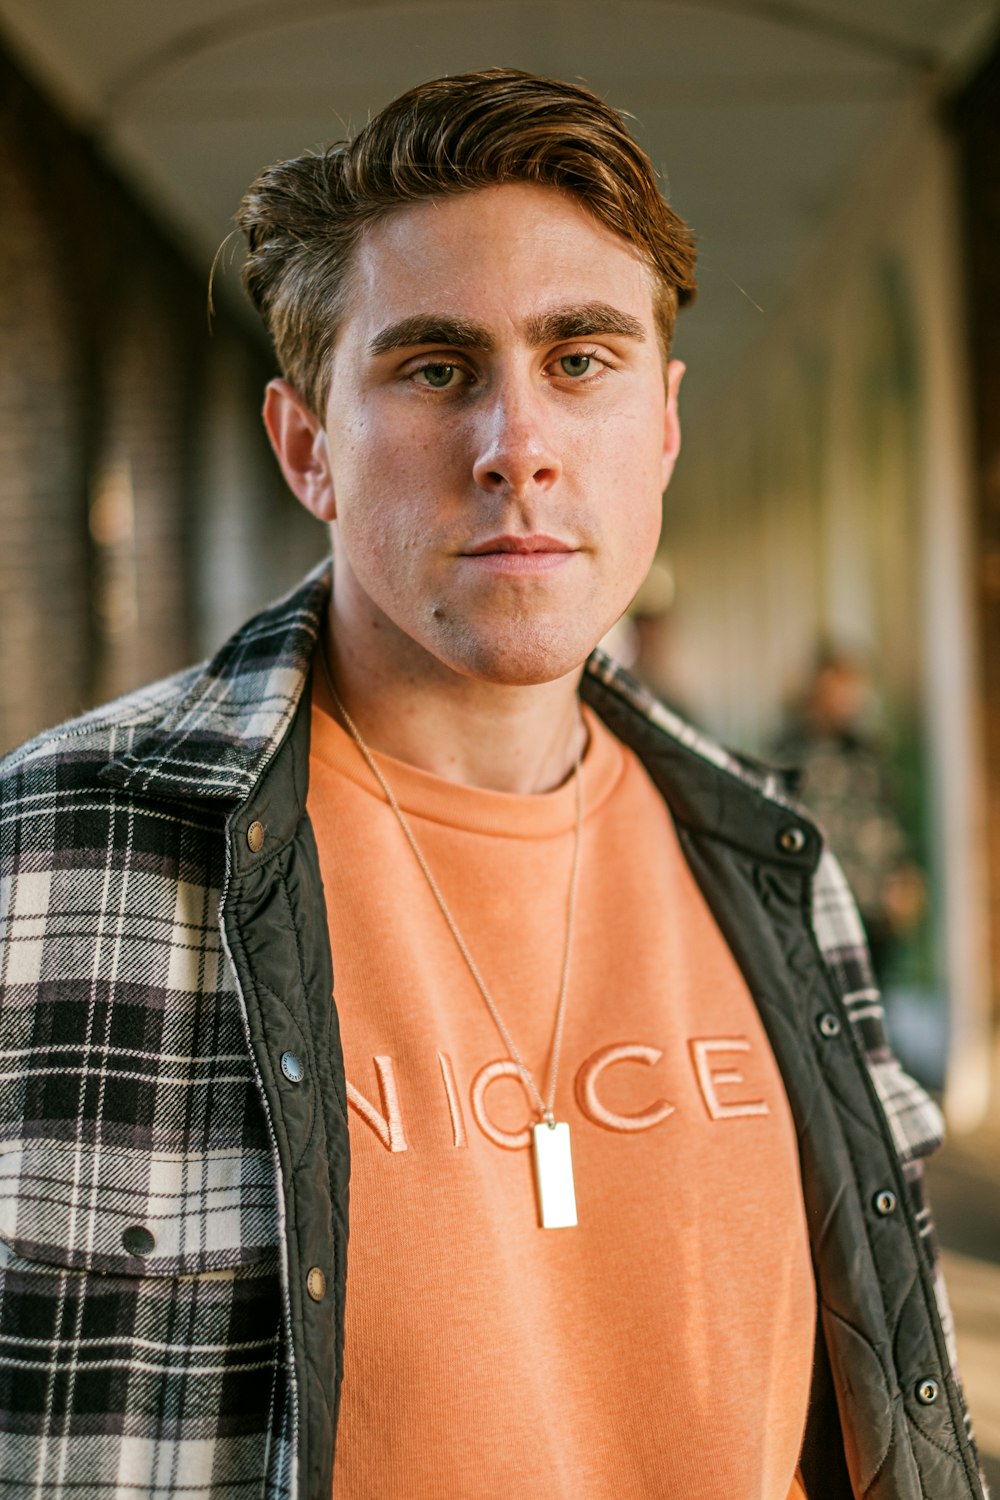 a young man wearing an orange shirt and a plaid jacket